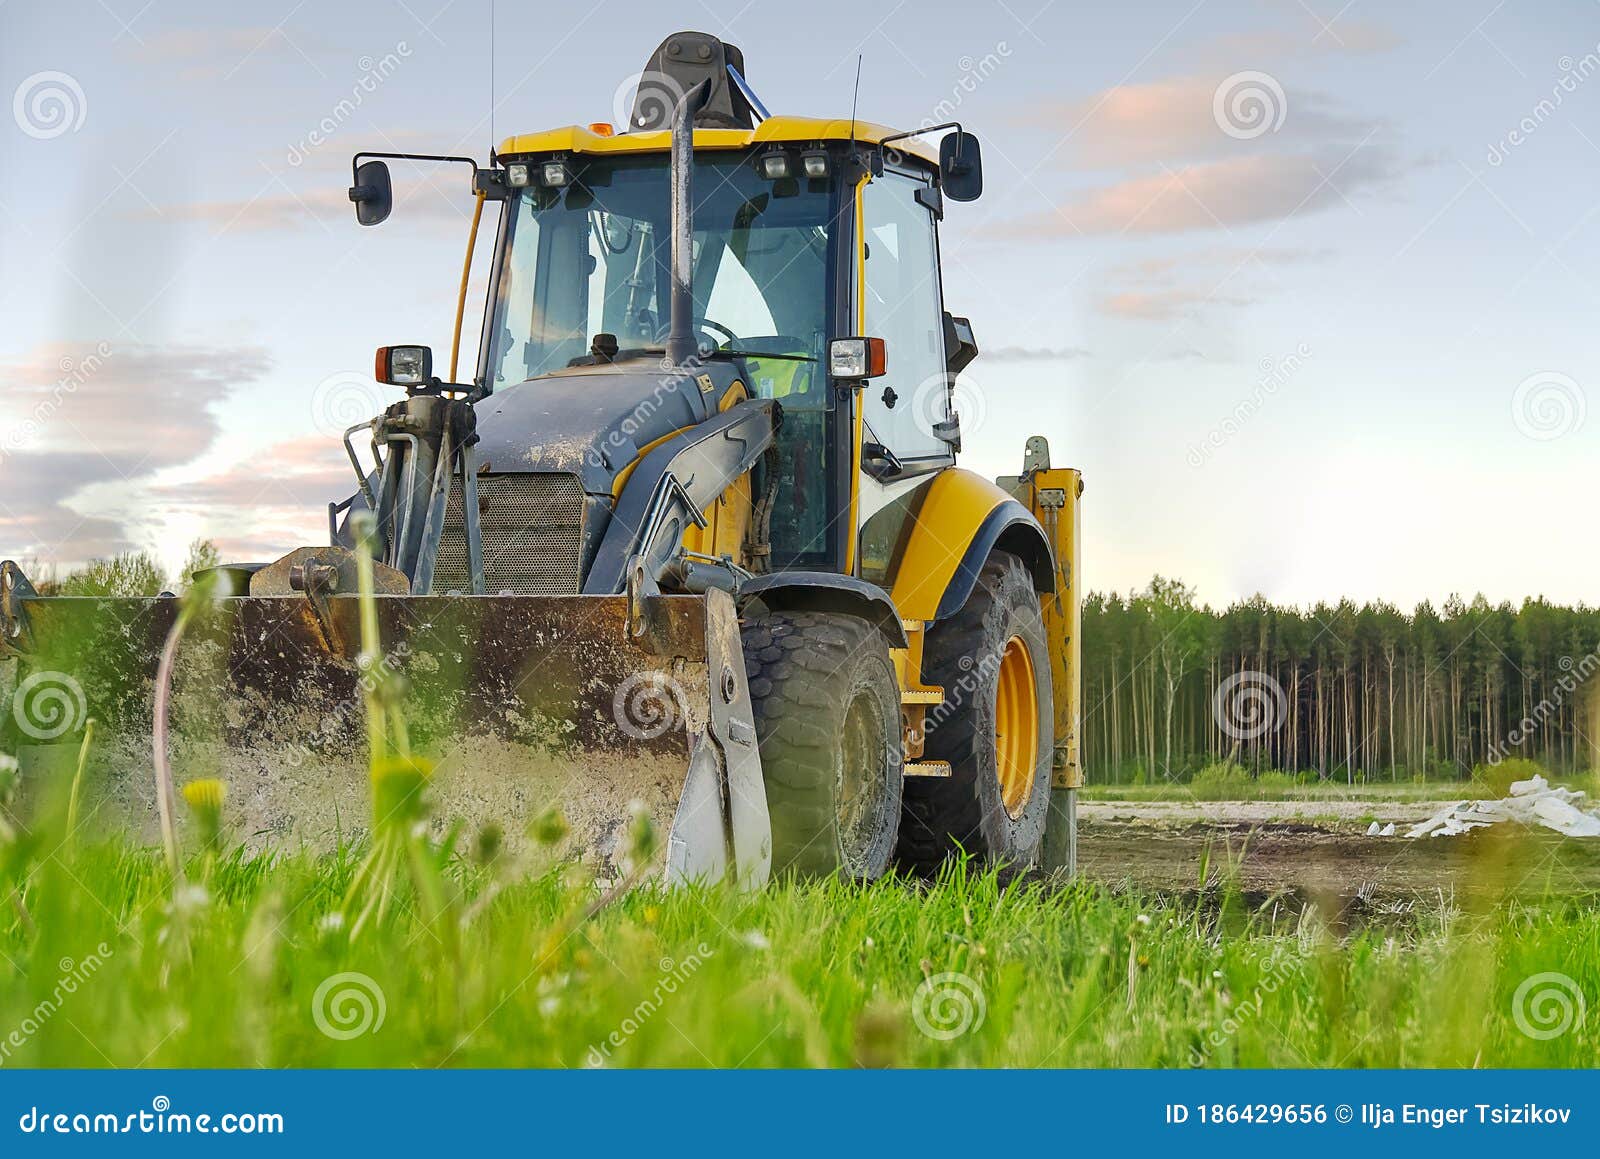 yellow excavator. yellow tractor on the field. construction machinery on field. large yellow wheel loader aligns a piece